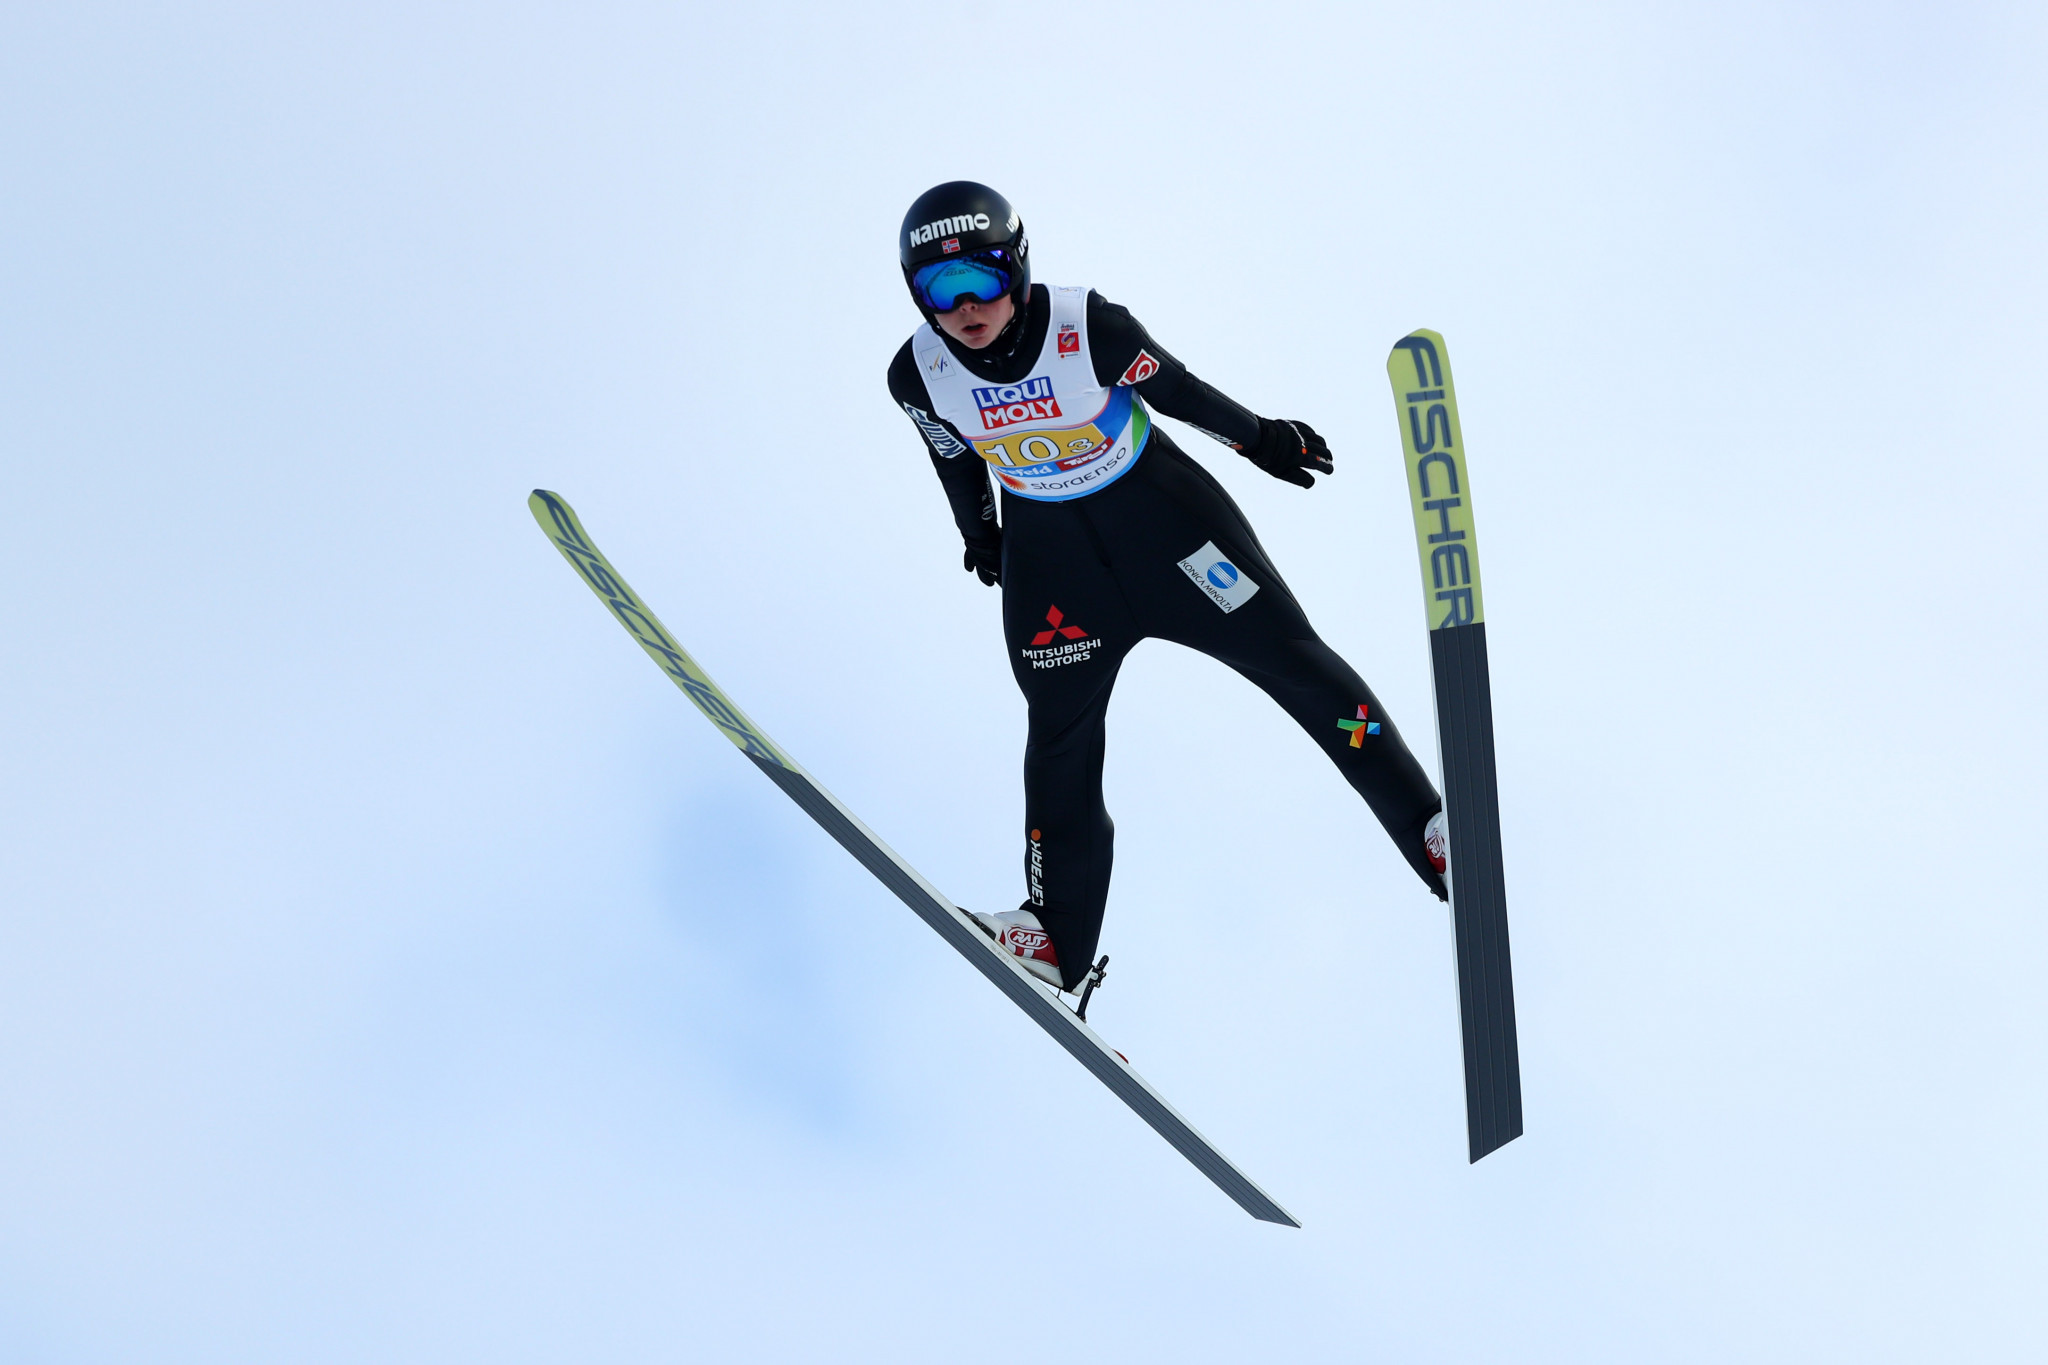 Norway's Maren Lundby led qualification at the women's FIS Ski Jumping World Cup in Chaikovsky in Russia ©Getty Images